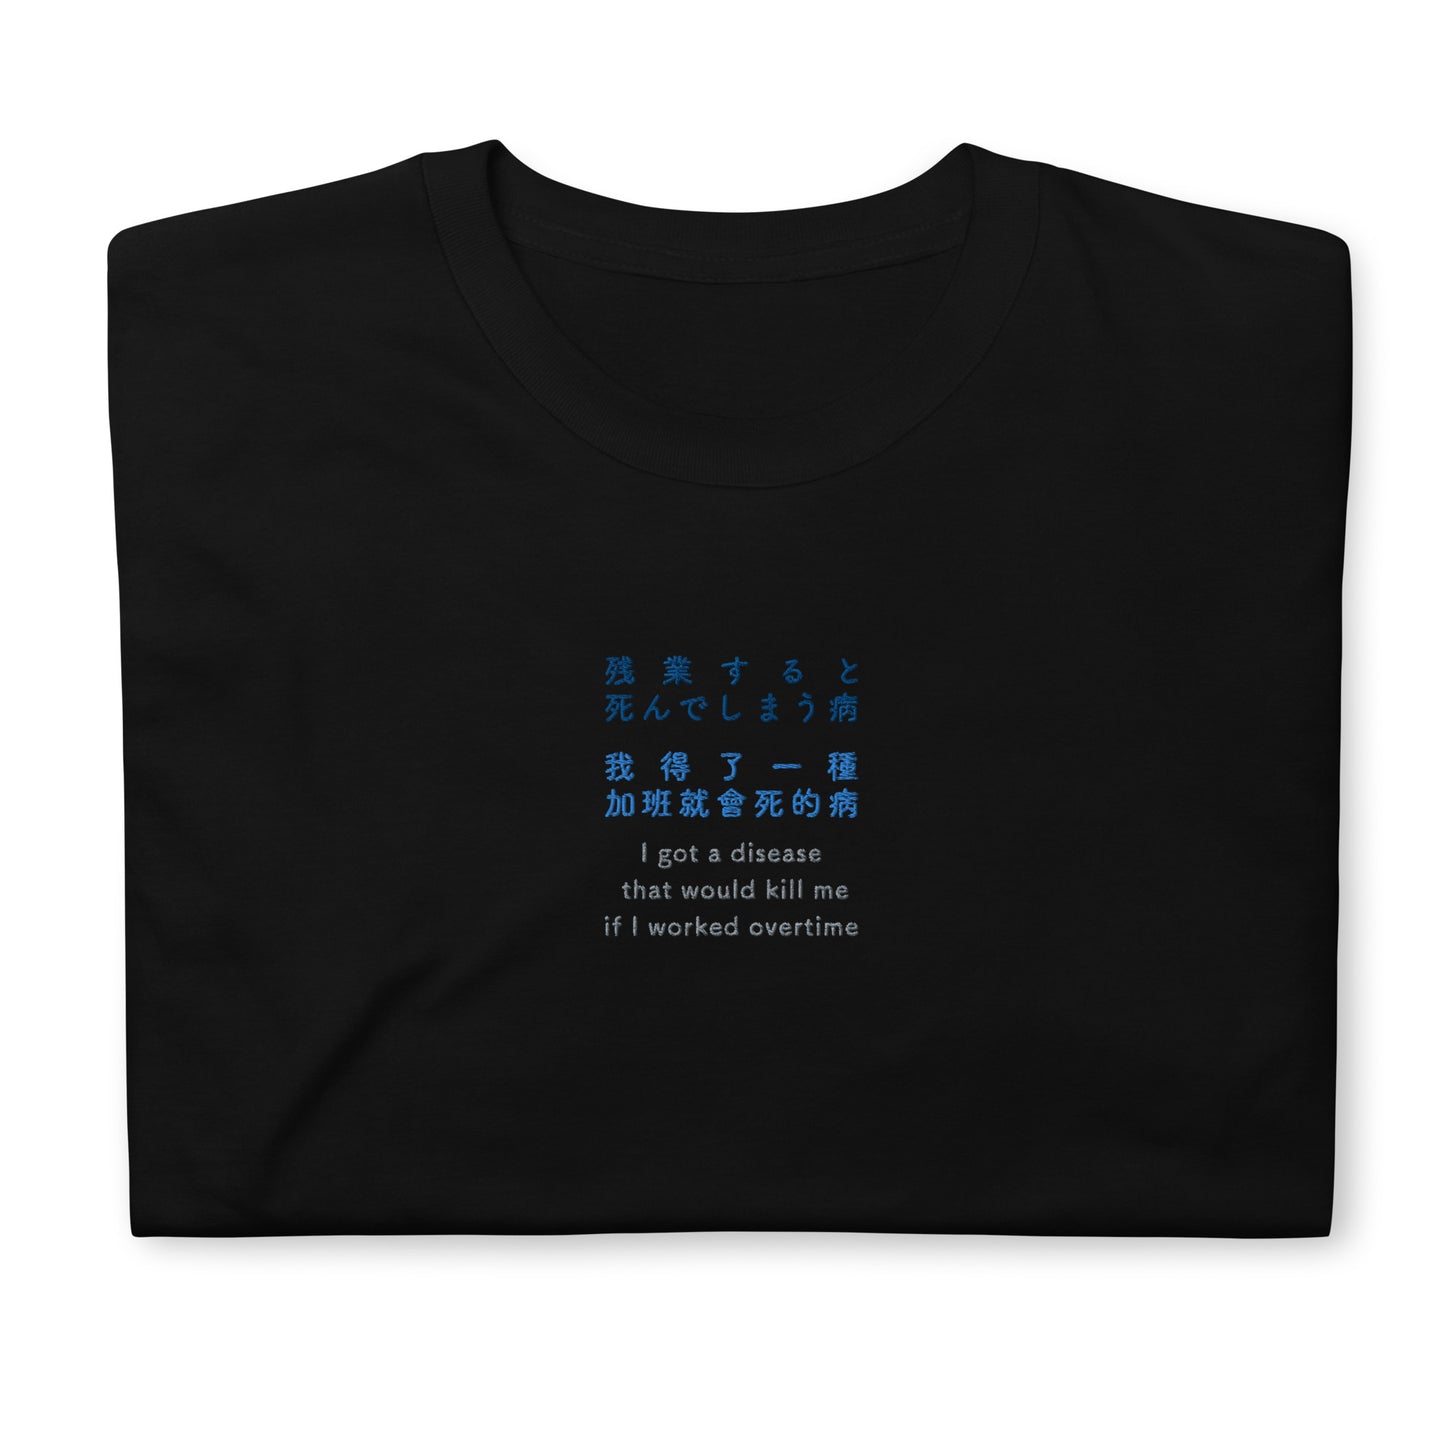 Black High Quality Tee - Front Design with an Navy, Light Blue, Gray Embroidery "i got a disease that would kill me if i worked overtime" in Japanese,Chinese and English